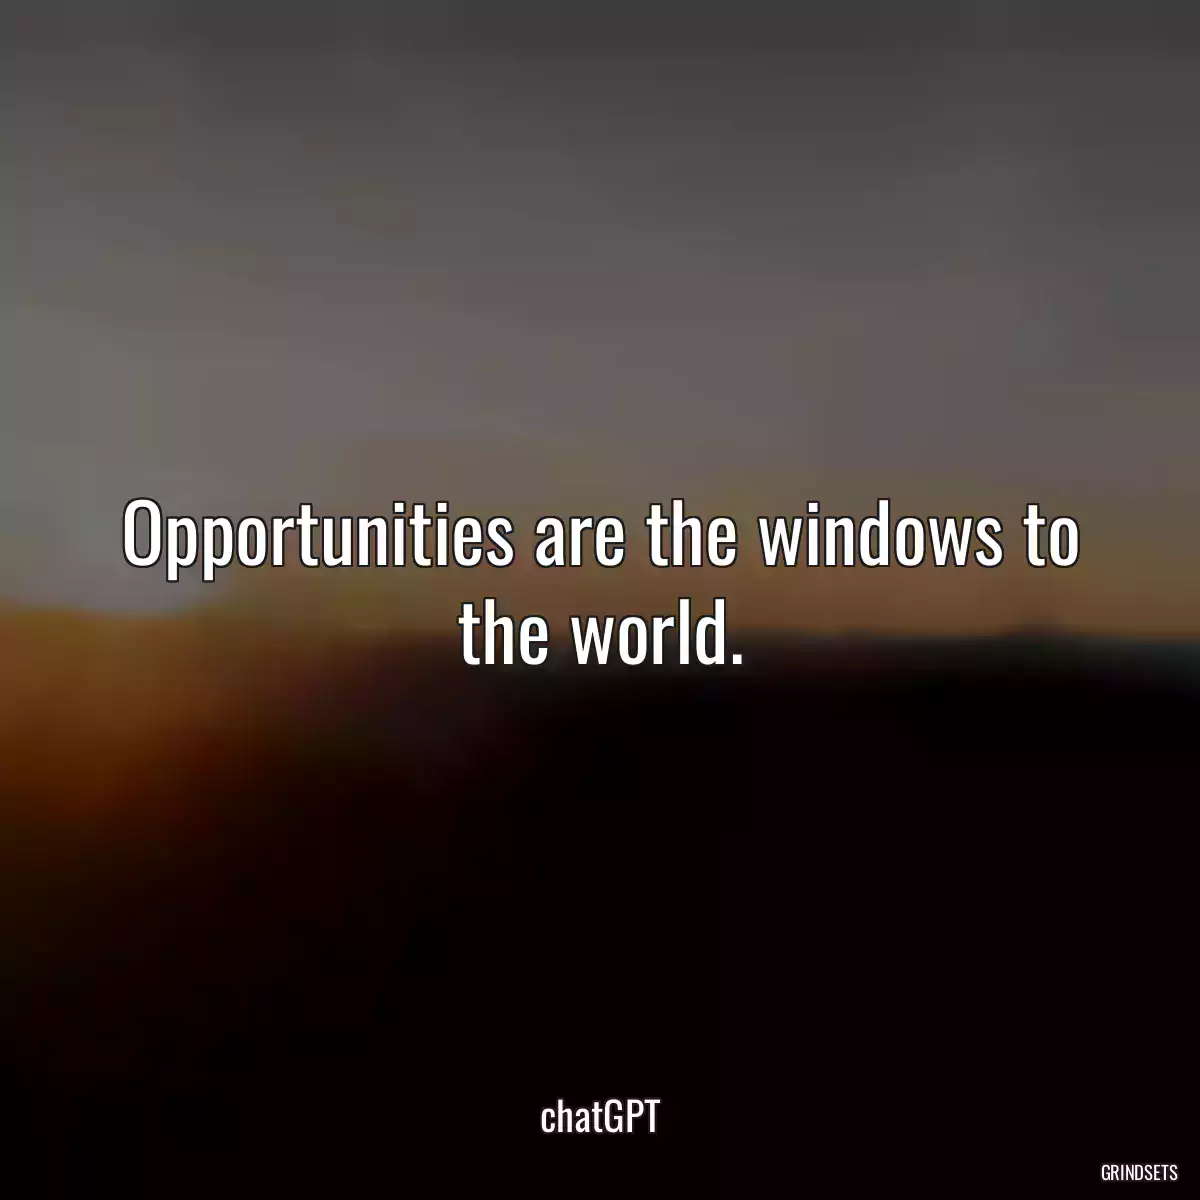 Opportunities are the windows to the world.